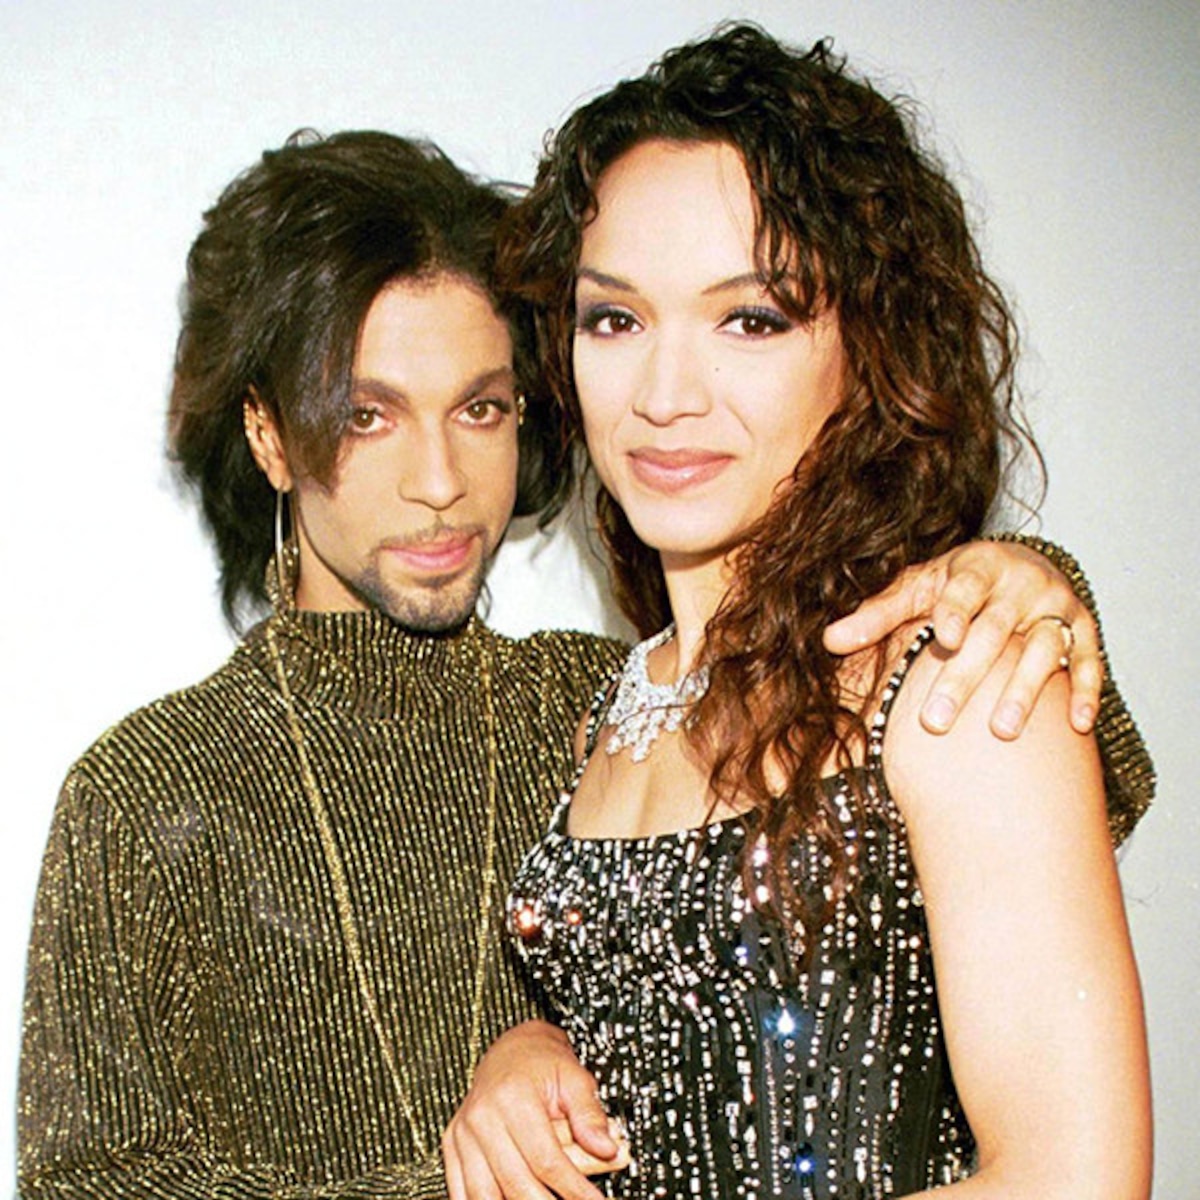 Prince's Ex-Wife Mayte Garcia Looks Back on Their Love